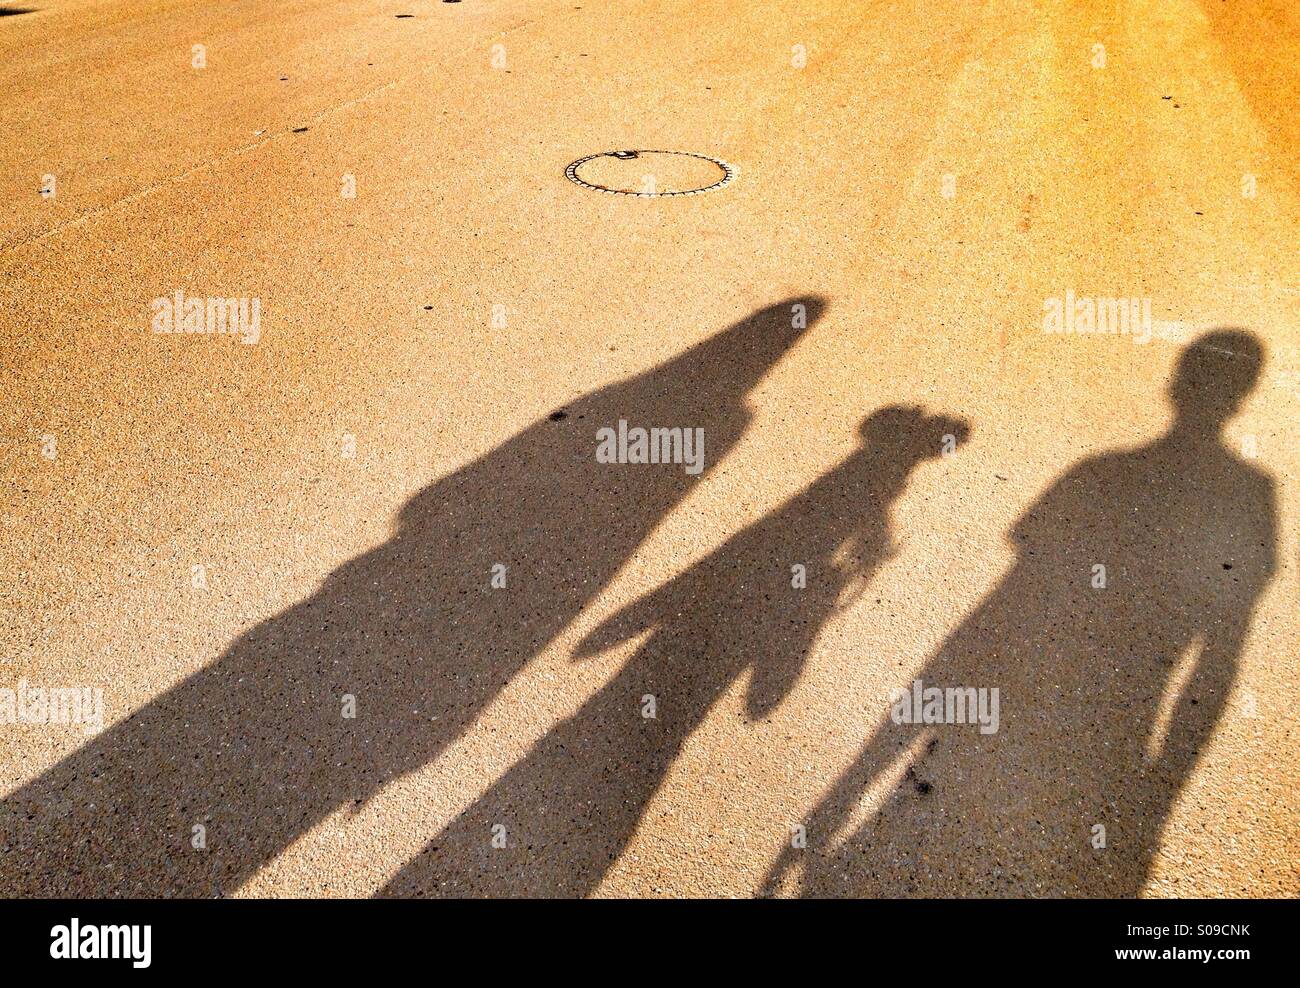 Three (3) person silhouette with one (1) child with mouse ears Stock Photo